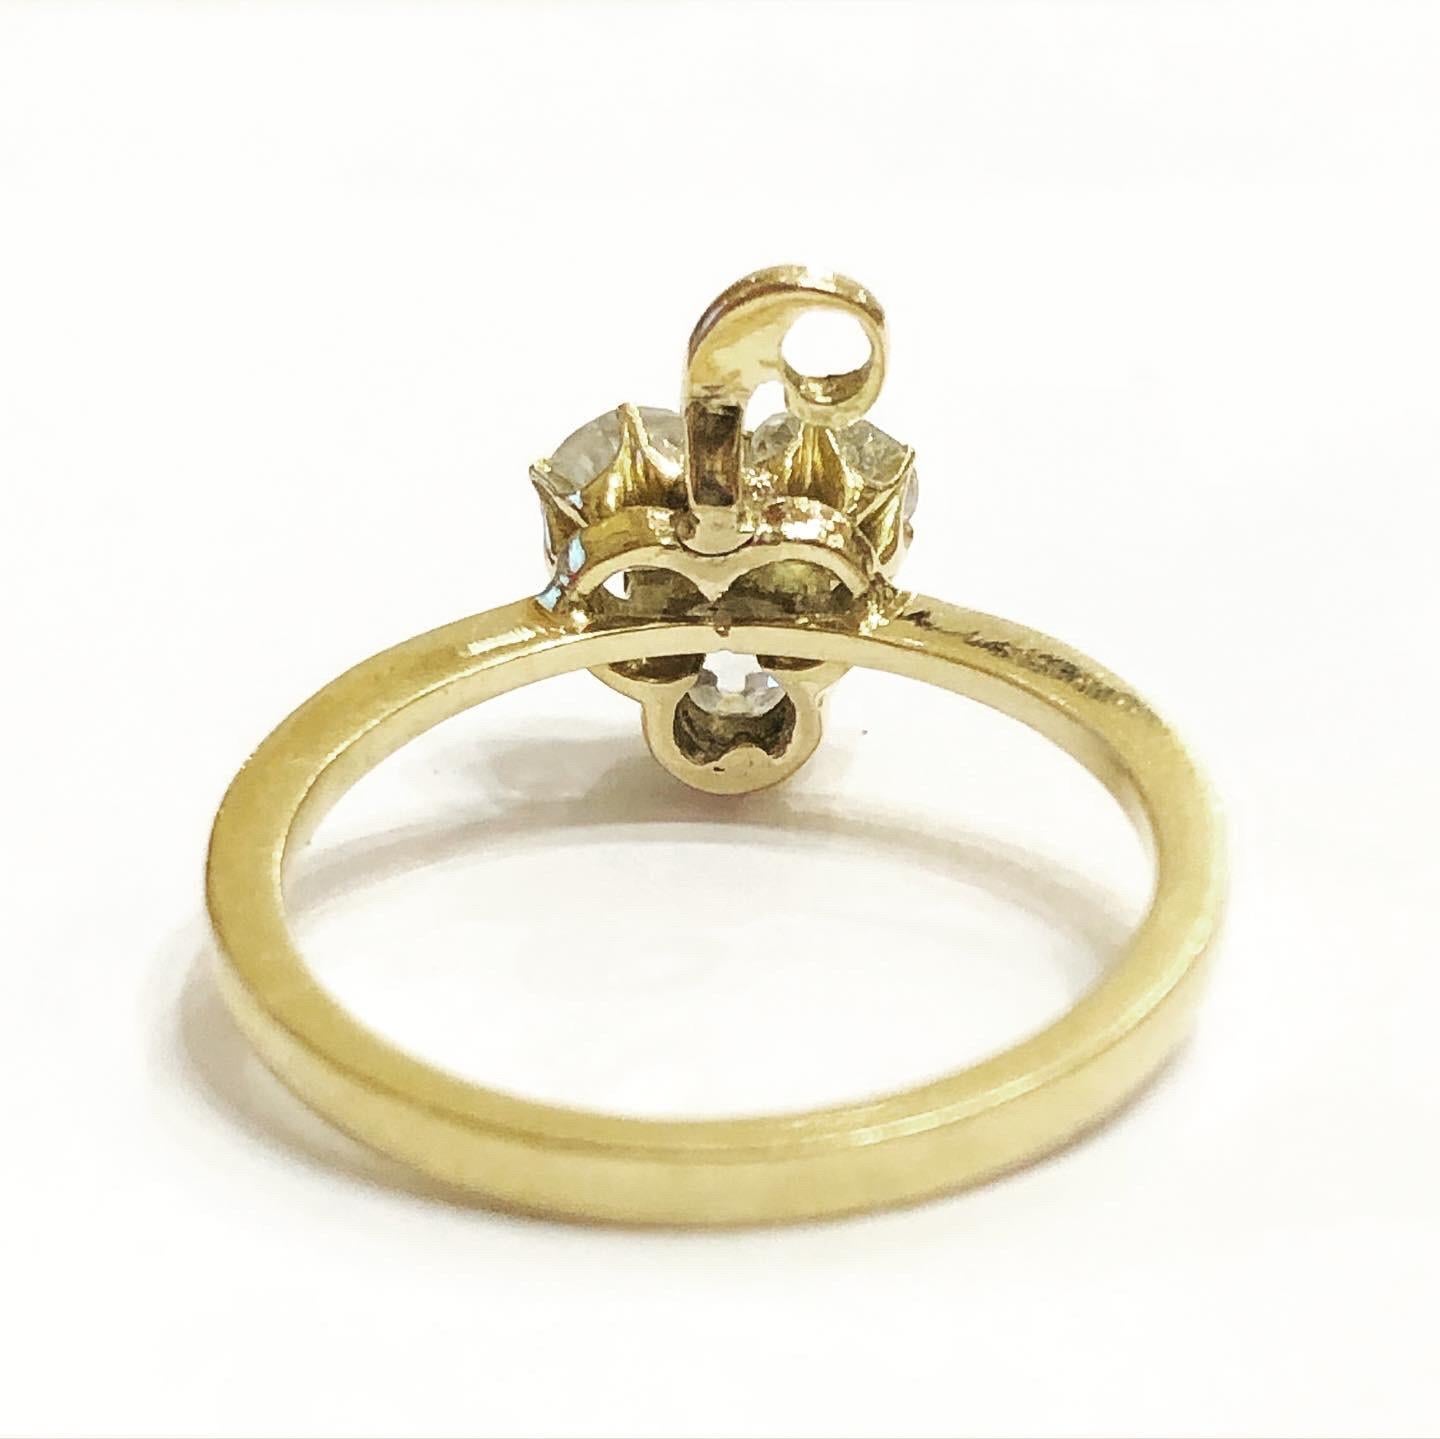 Splendid antique cocktail  represents a clover whose leaves are set with old European cut diamonds.
18 karat yellow gold.
Condition: good. 
Old European diamond cut.
Total approximate diamond carat weight: 0.8 carats.
Height:  2.2 cm Width: 1.9 cm.